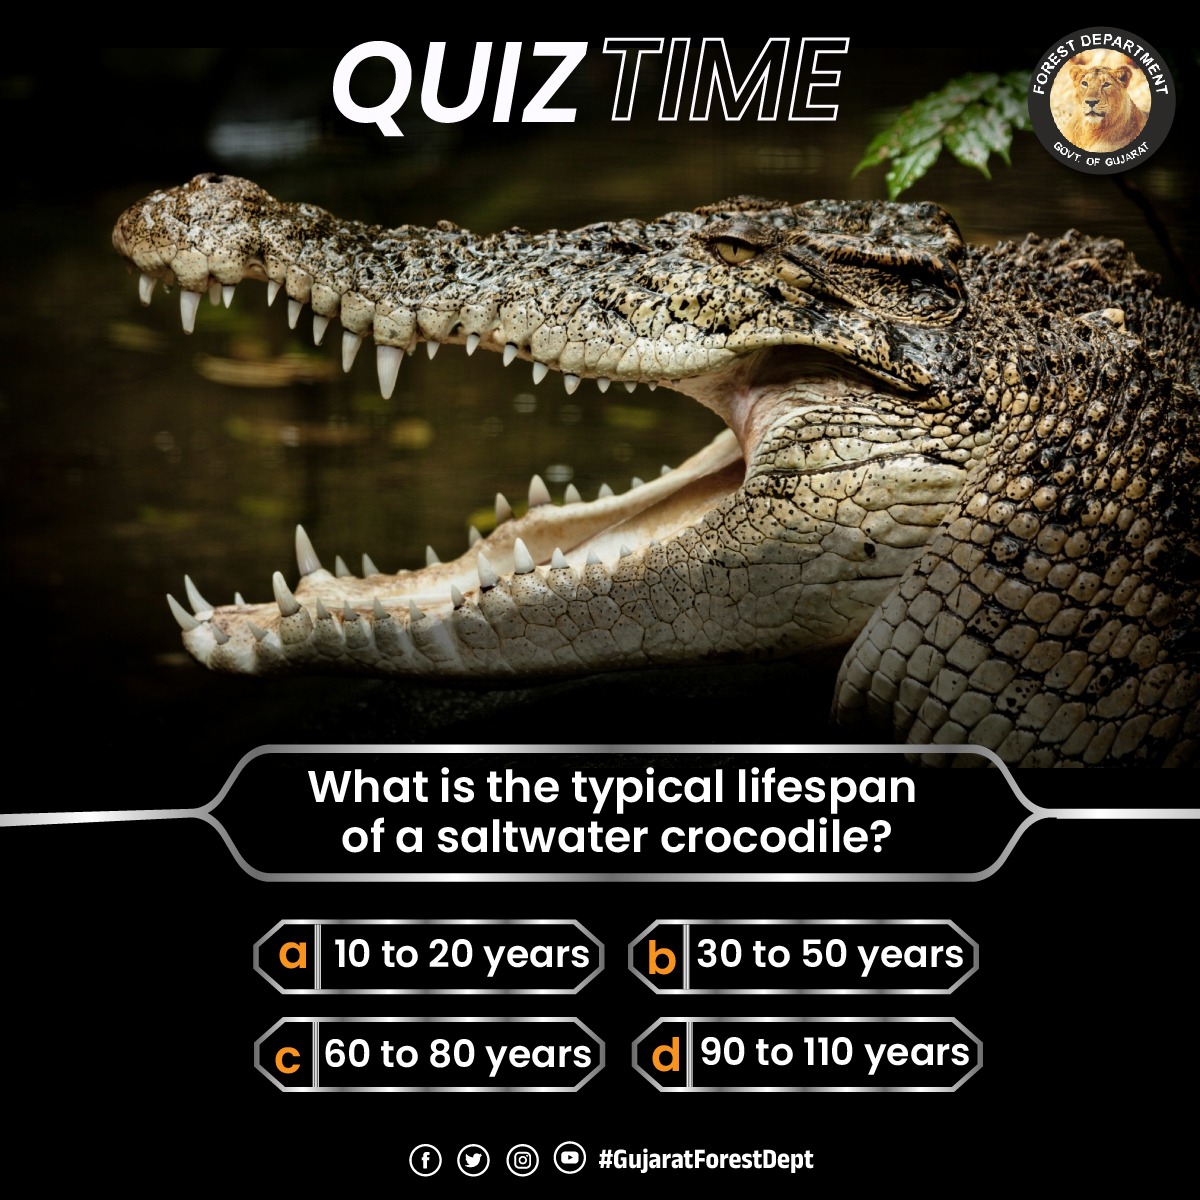 Test your wildlife knowledge with this captivating quiz! Can you guess the typical lifespan of a saltwater crocodile?  Comment your answer below and let's see who's got the right bite! 🦈📚 

#WildlifeQuiz #LifespanChallenge #GuessTheCrocodileAge